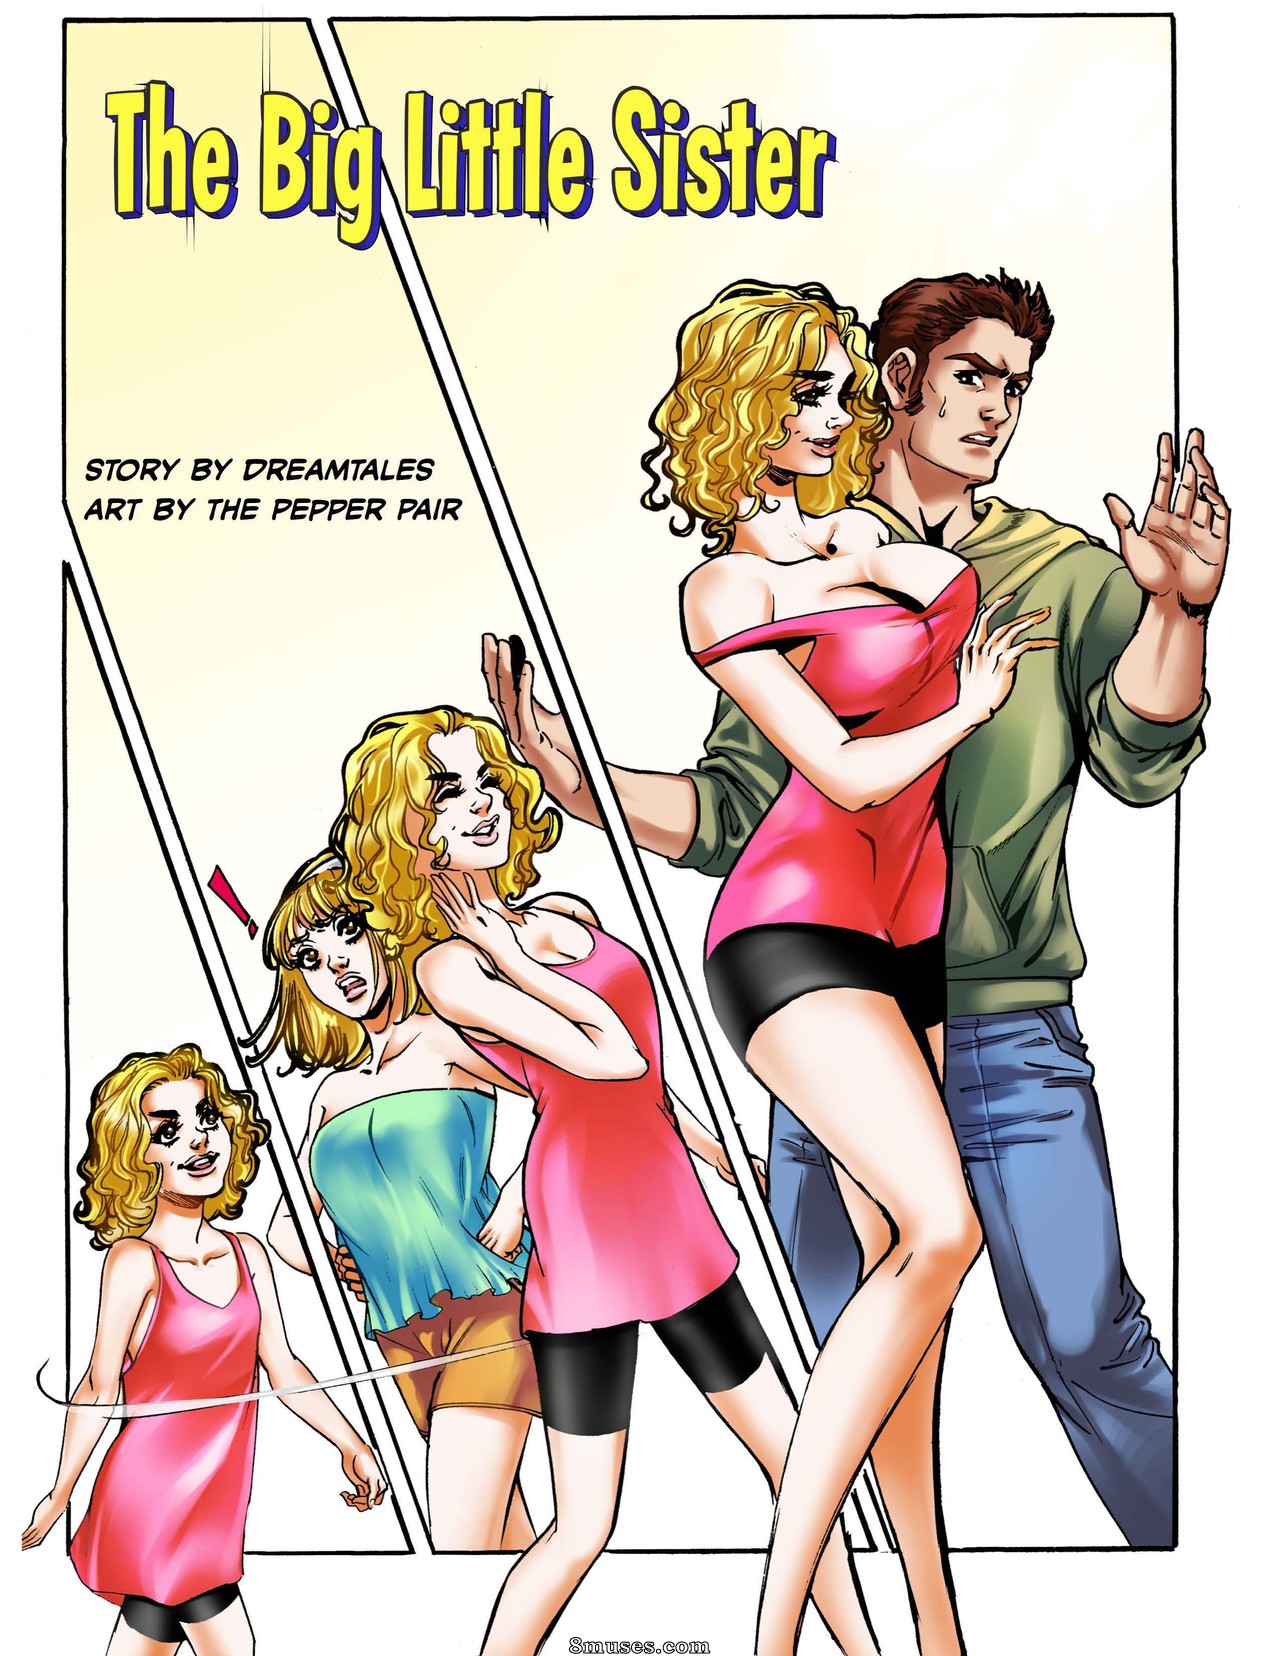 Brother Sister Sex Cartoons - The Big Little Sister Issue 1 - 8muses Comics - Sex Comics and Porn Cartoons